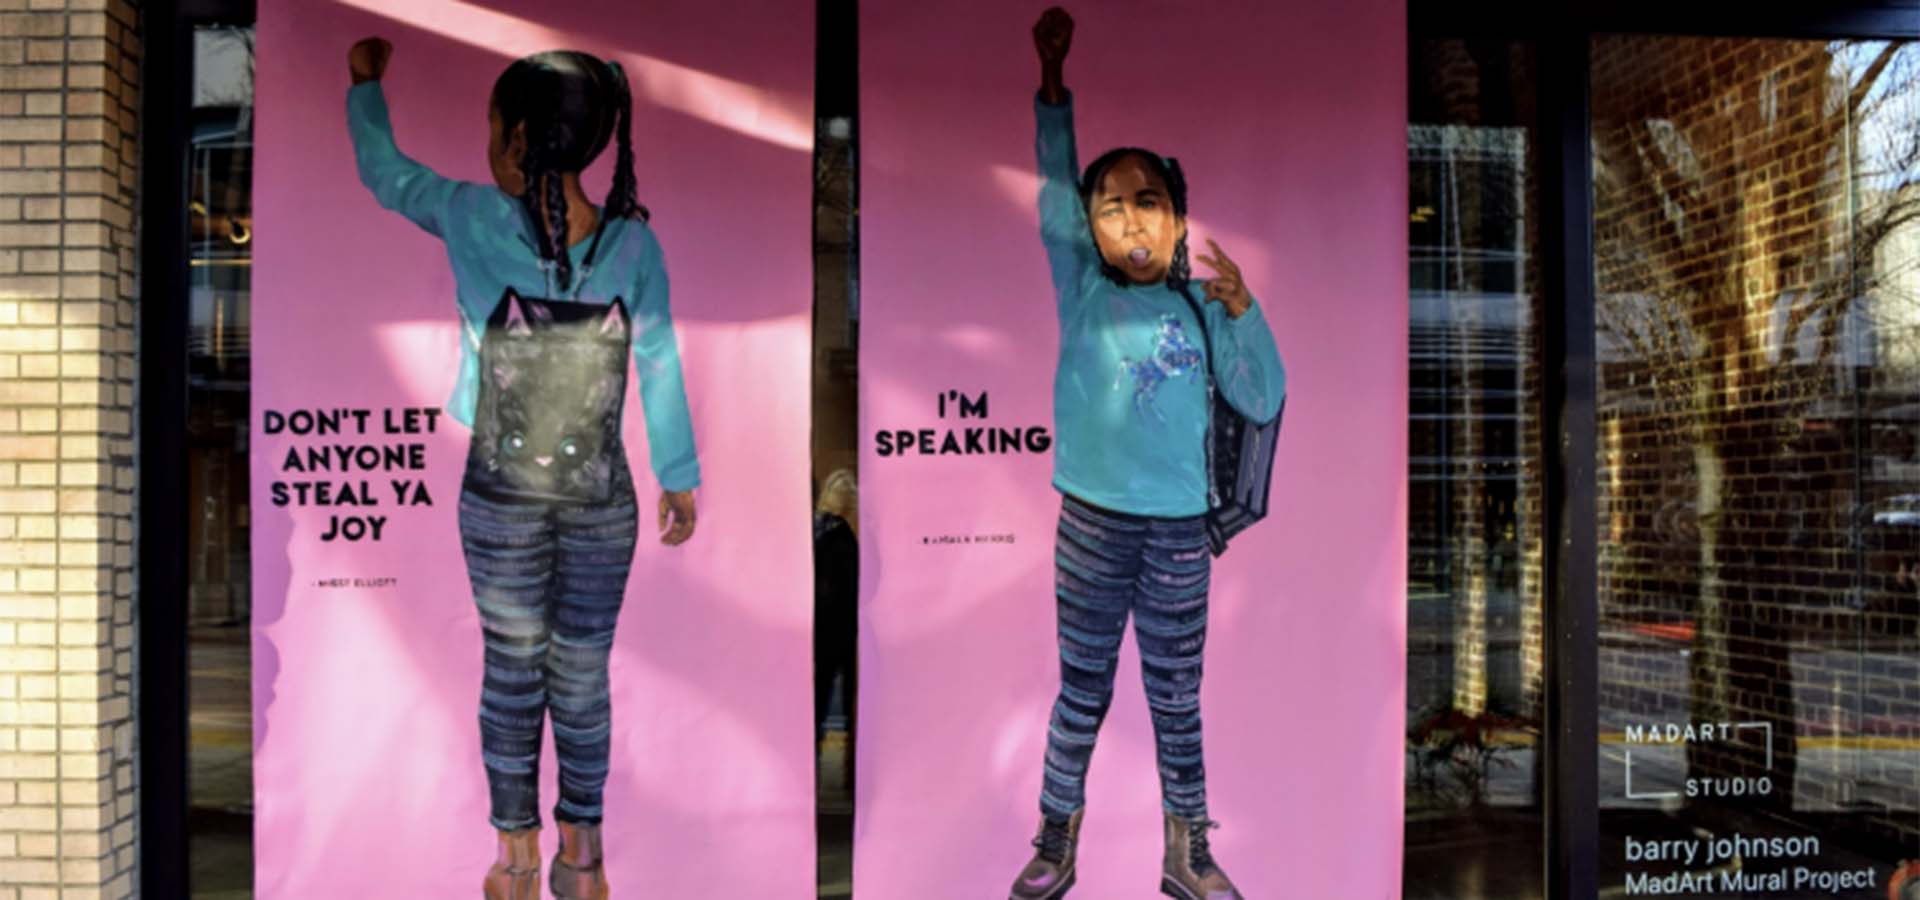 Window mural art featuring an African-American girl with messaging about BIPOC awareness.